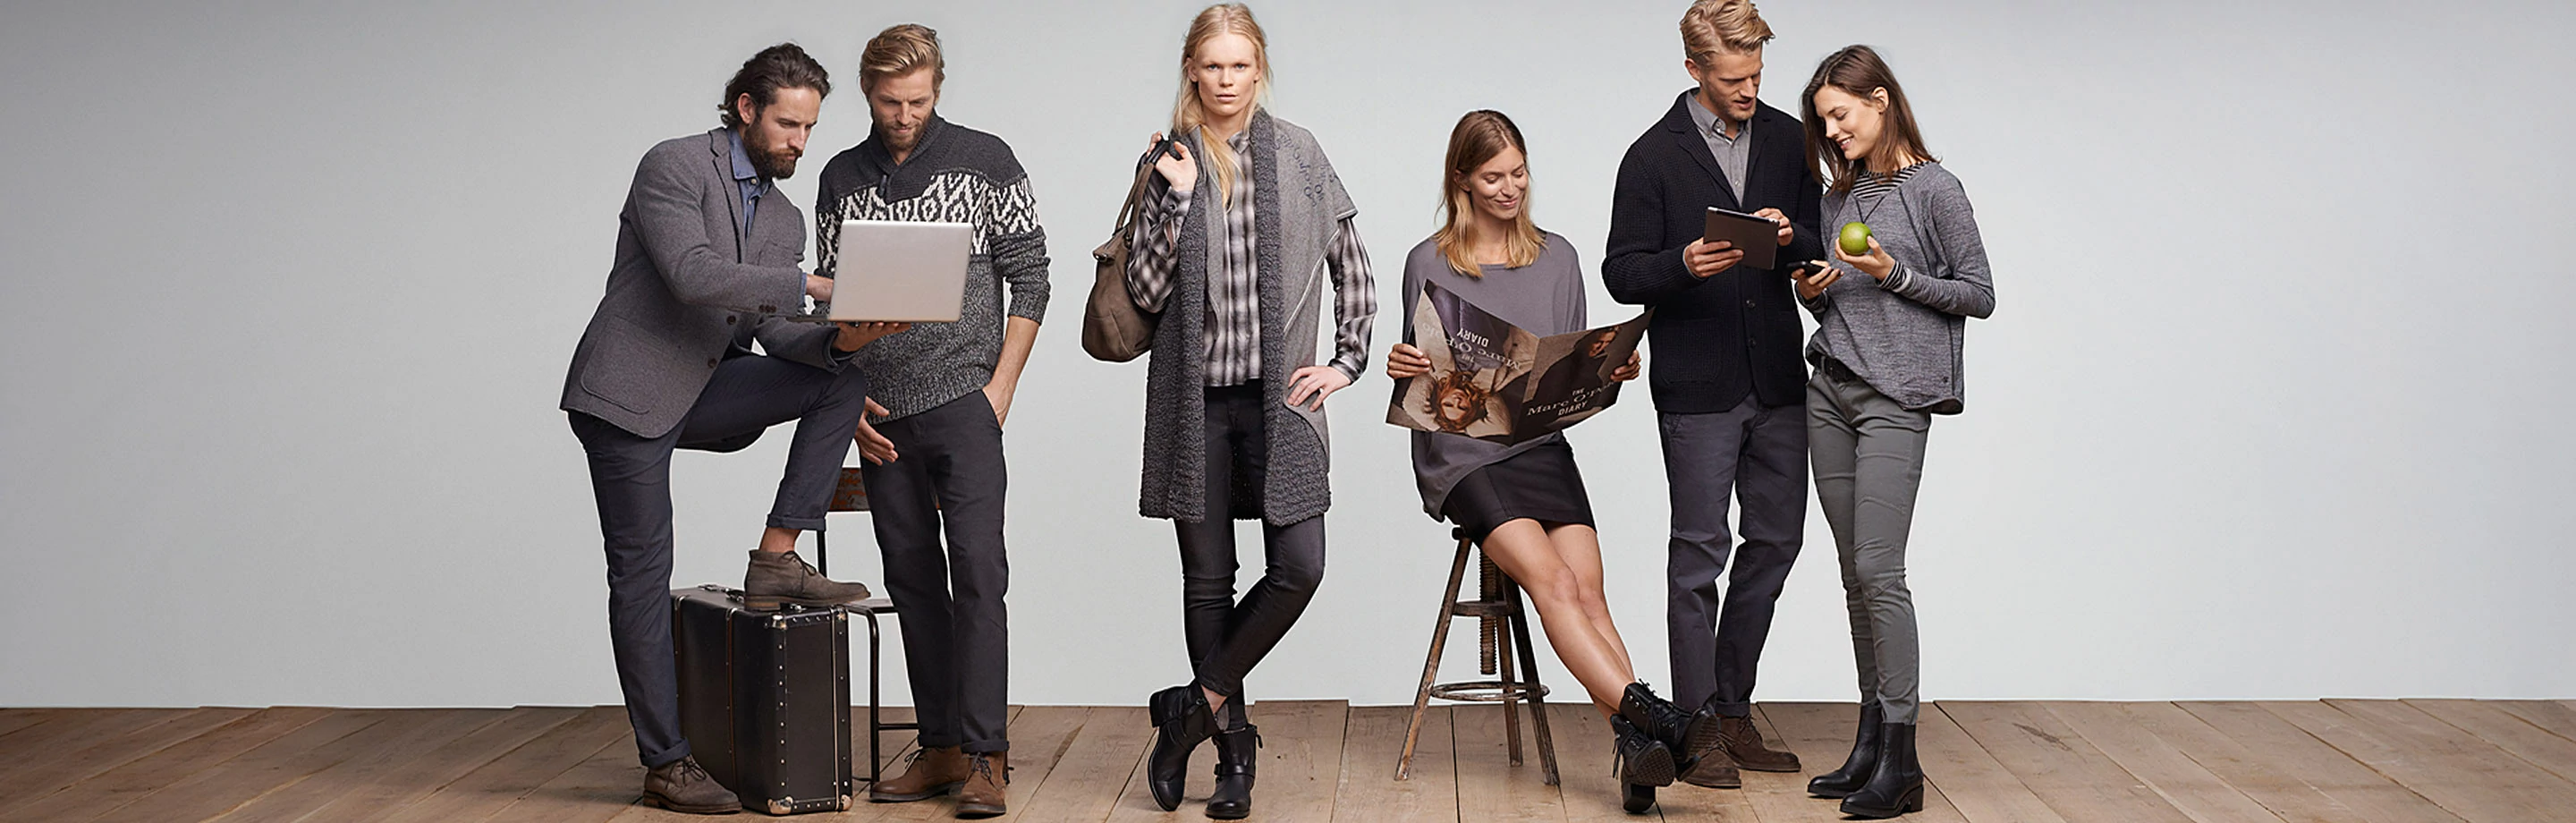 A group photo with three female and three male models in a studio. Some of the people are looking at a laptop and tablet, reading a Marc'O'Polo magazine or looking towards the camera.